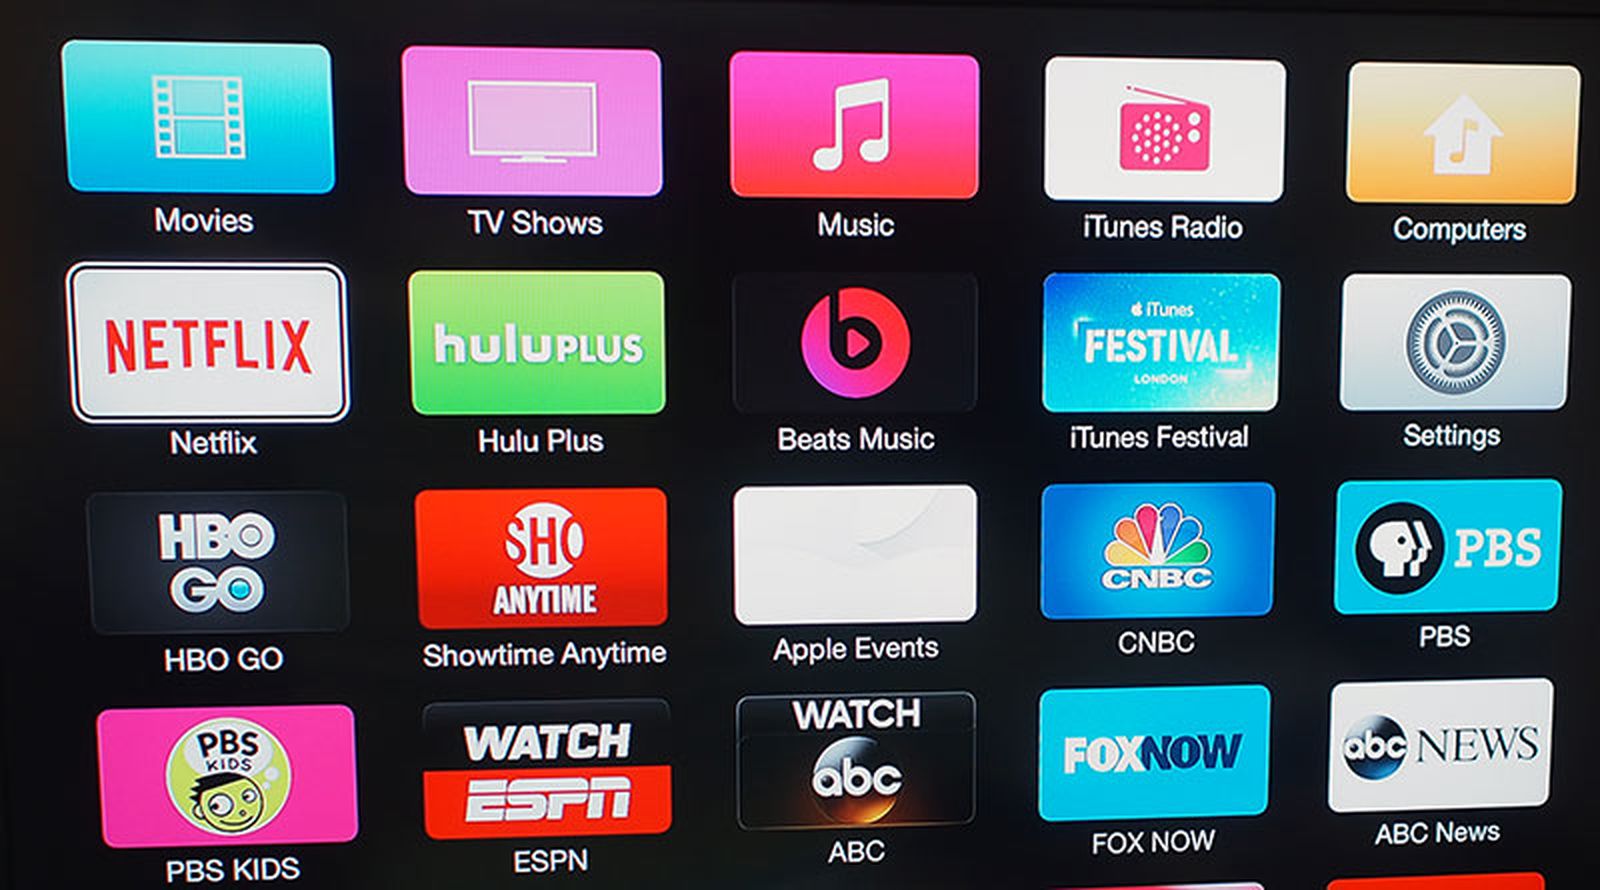 Apple Updated With Beats Music Channel, Revamped Design, iOS 8 Feature Support - MacRumors